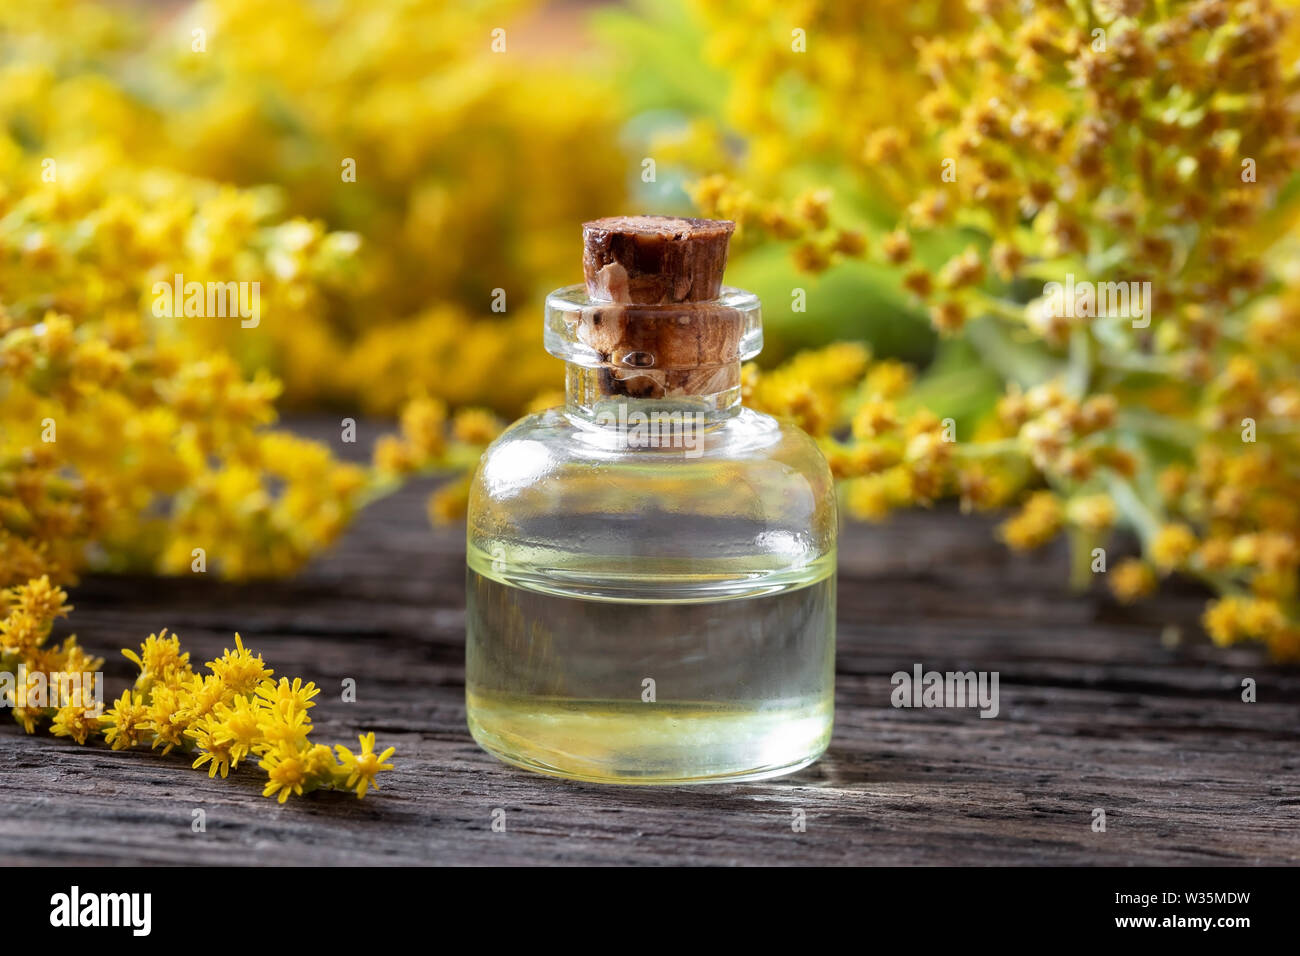 A bottle of Canadian goldenrod essential oil with fresh Solidago canadensis flowers Stock Photo